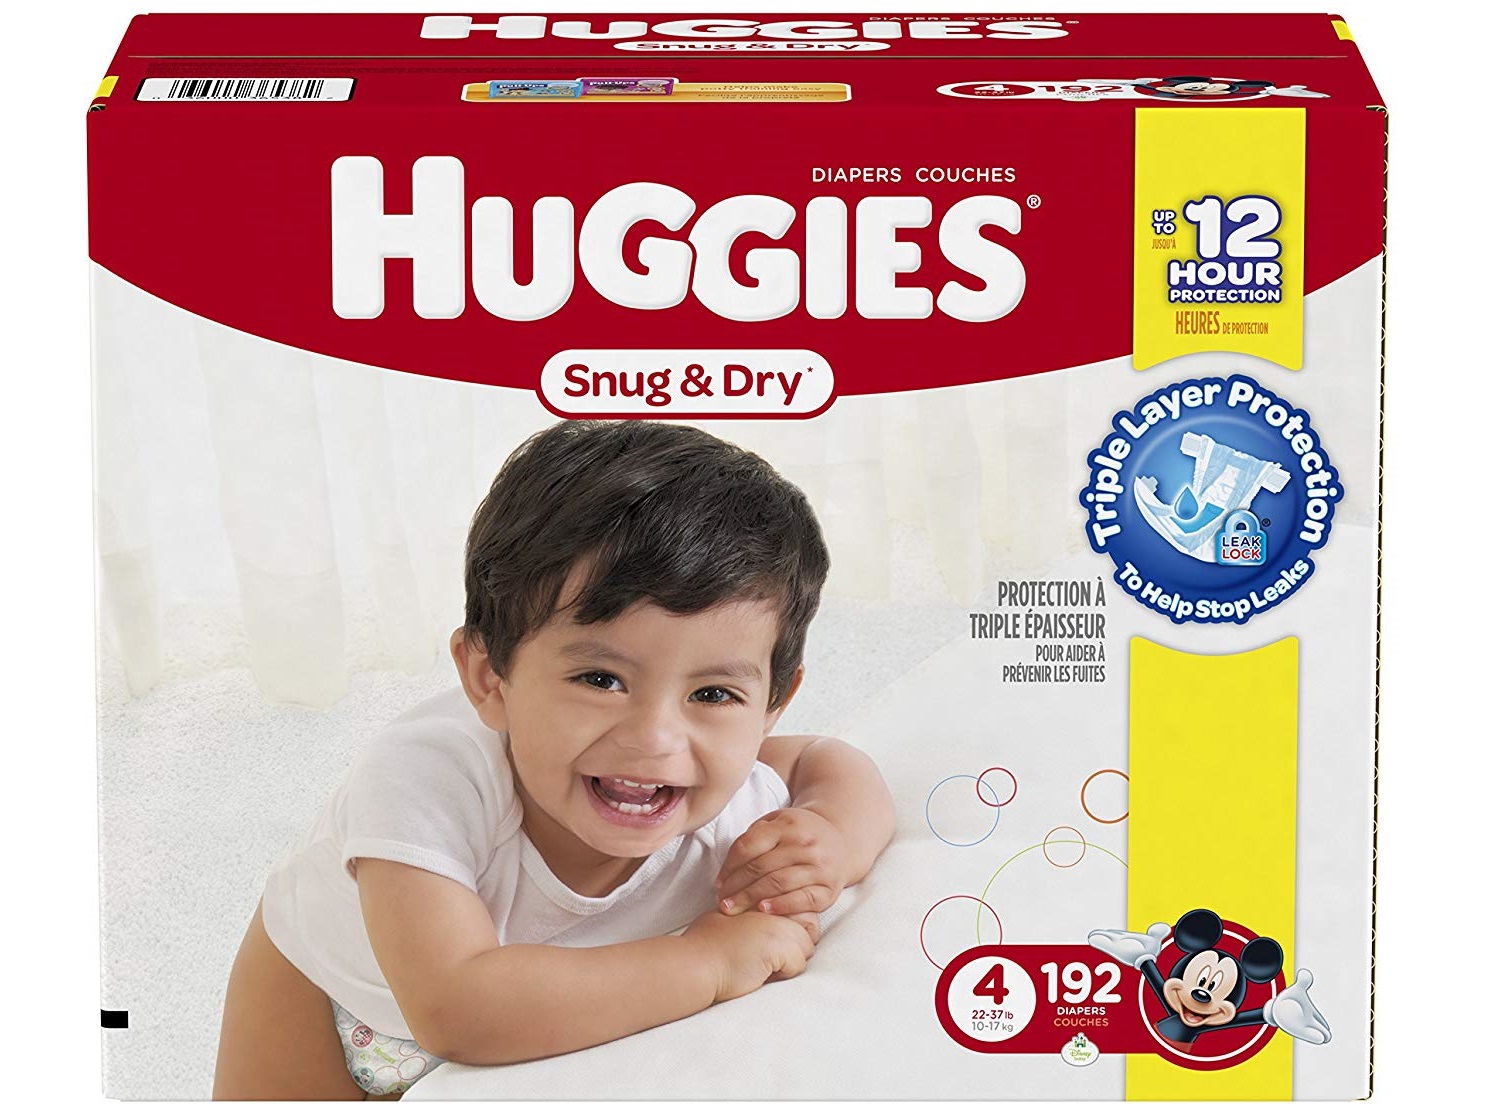 A Review of the Huggies Snug and Dry Diapers, Size 4, Economy Plus Pack, 192 Count